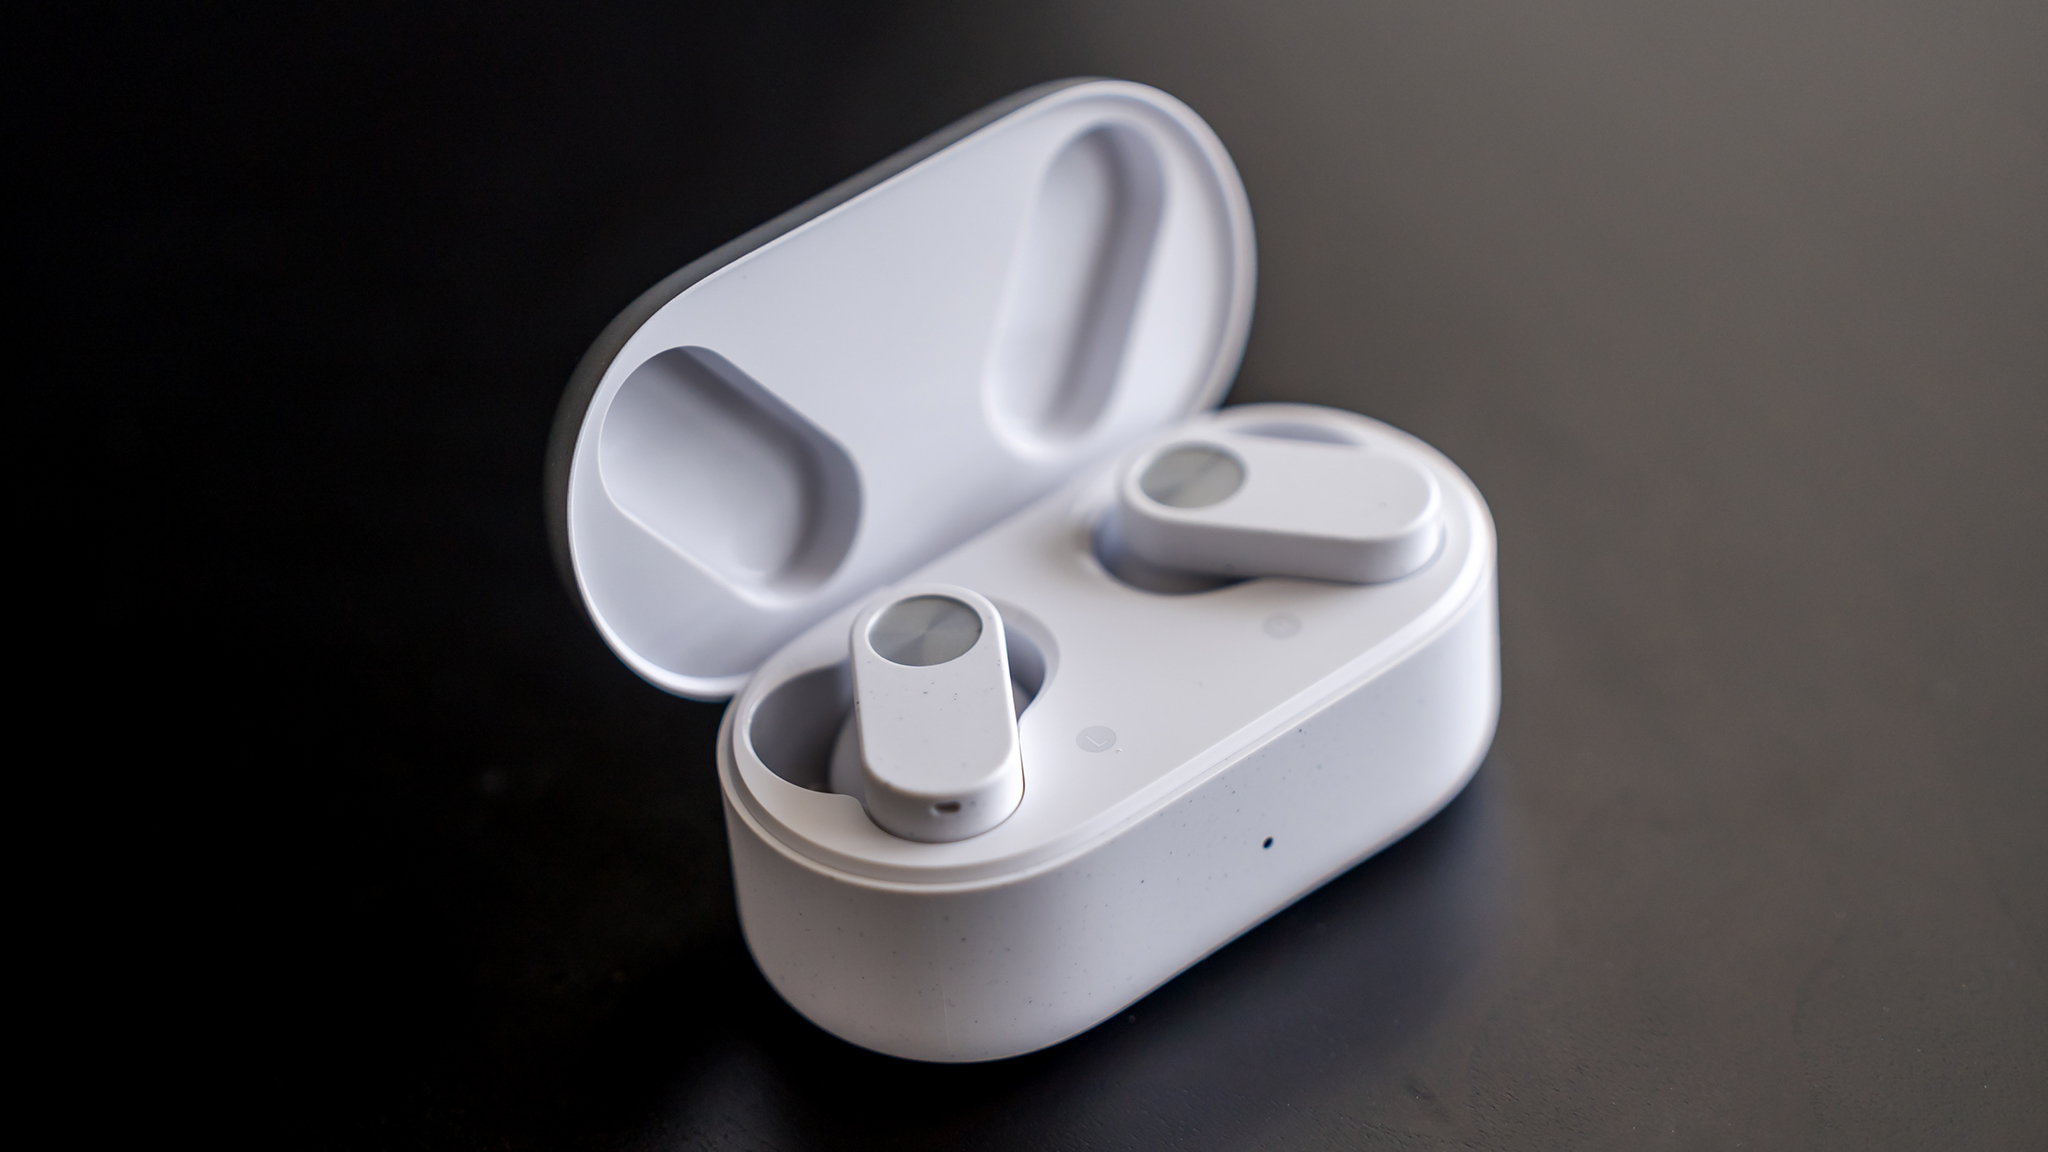 OnePlus Nord Buds 2 earbuds open in case.